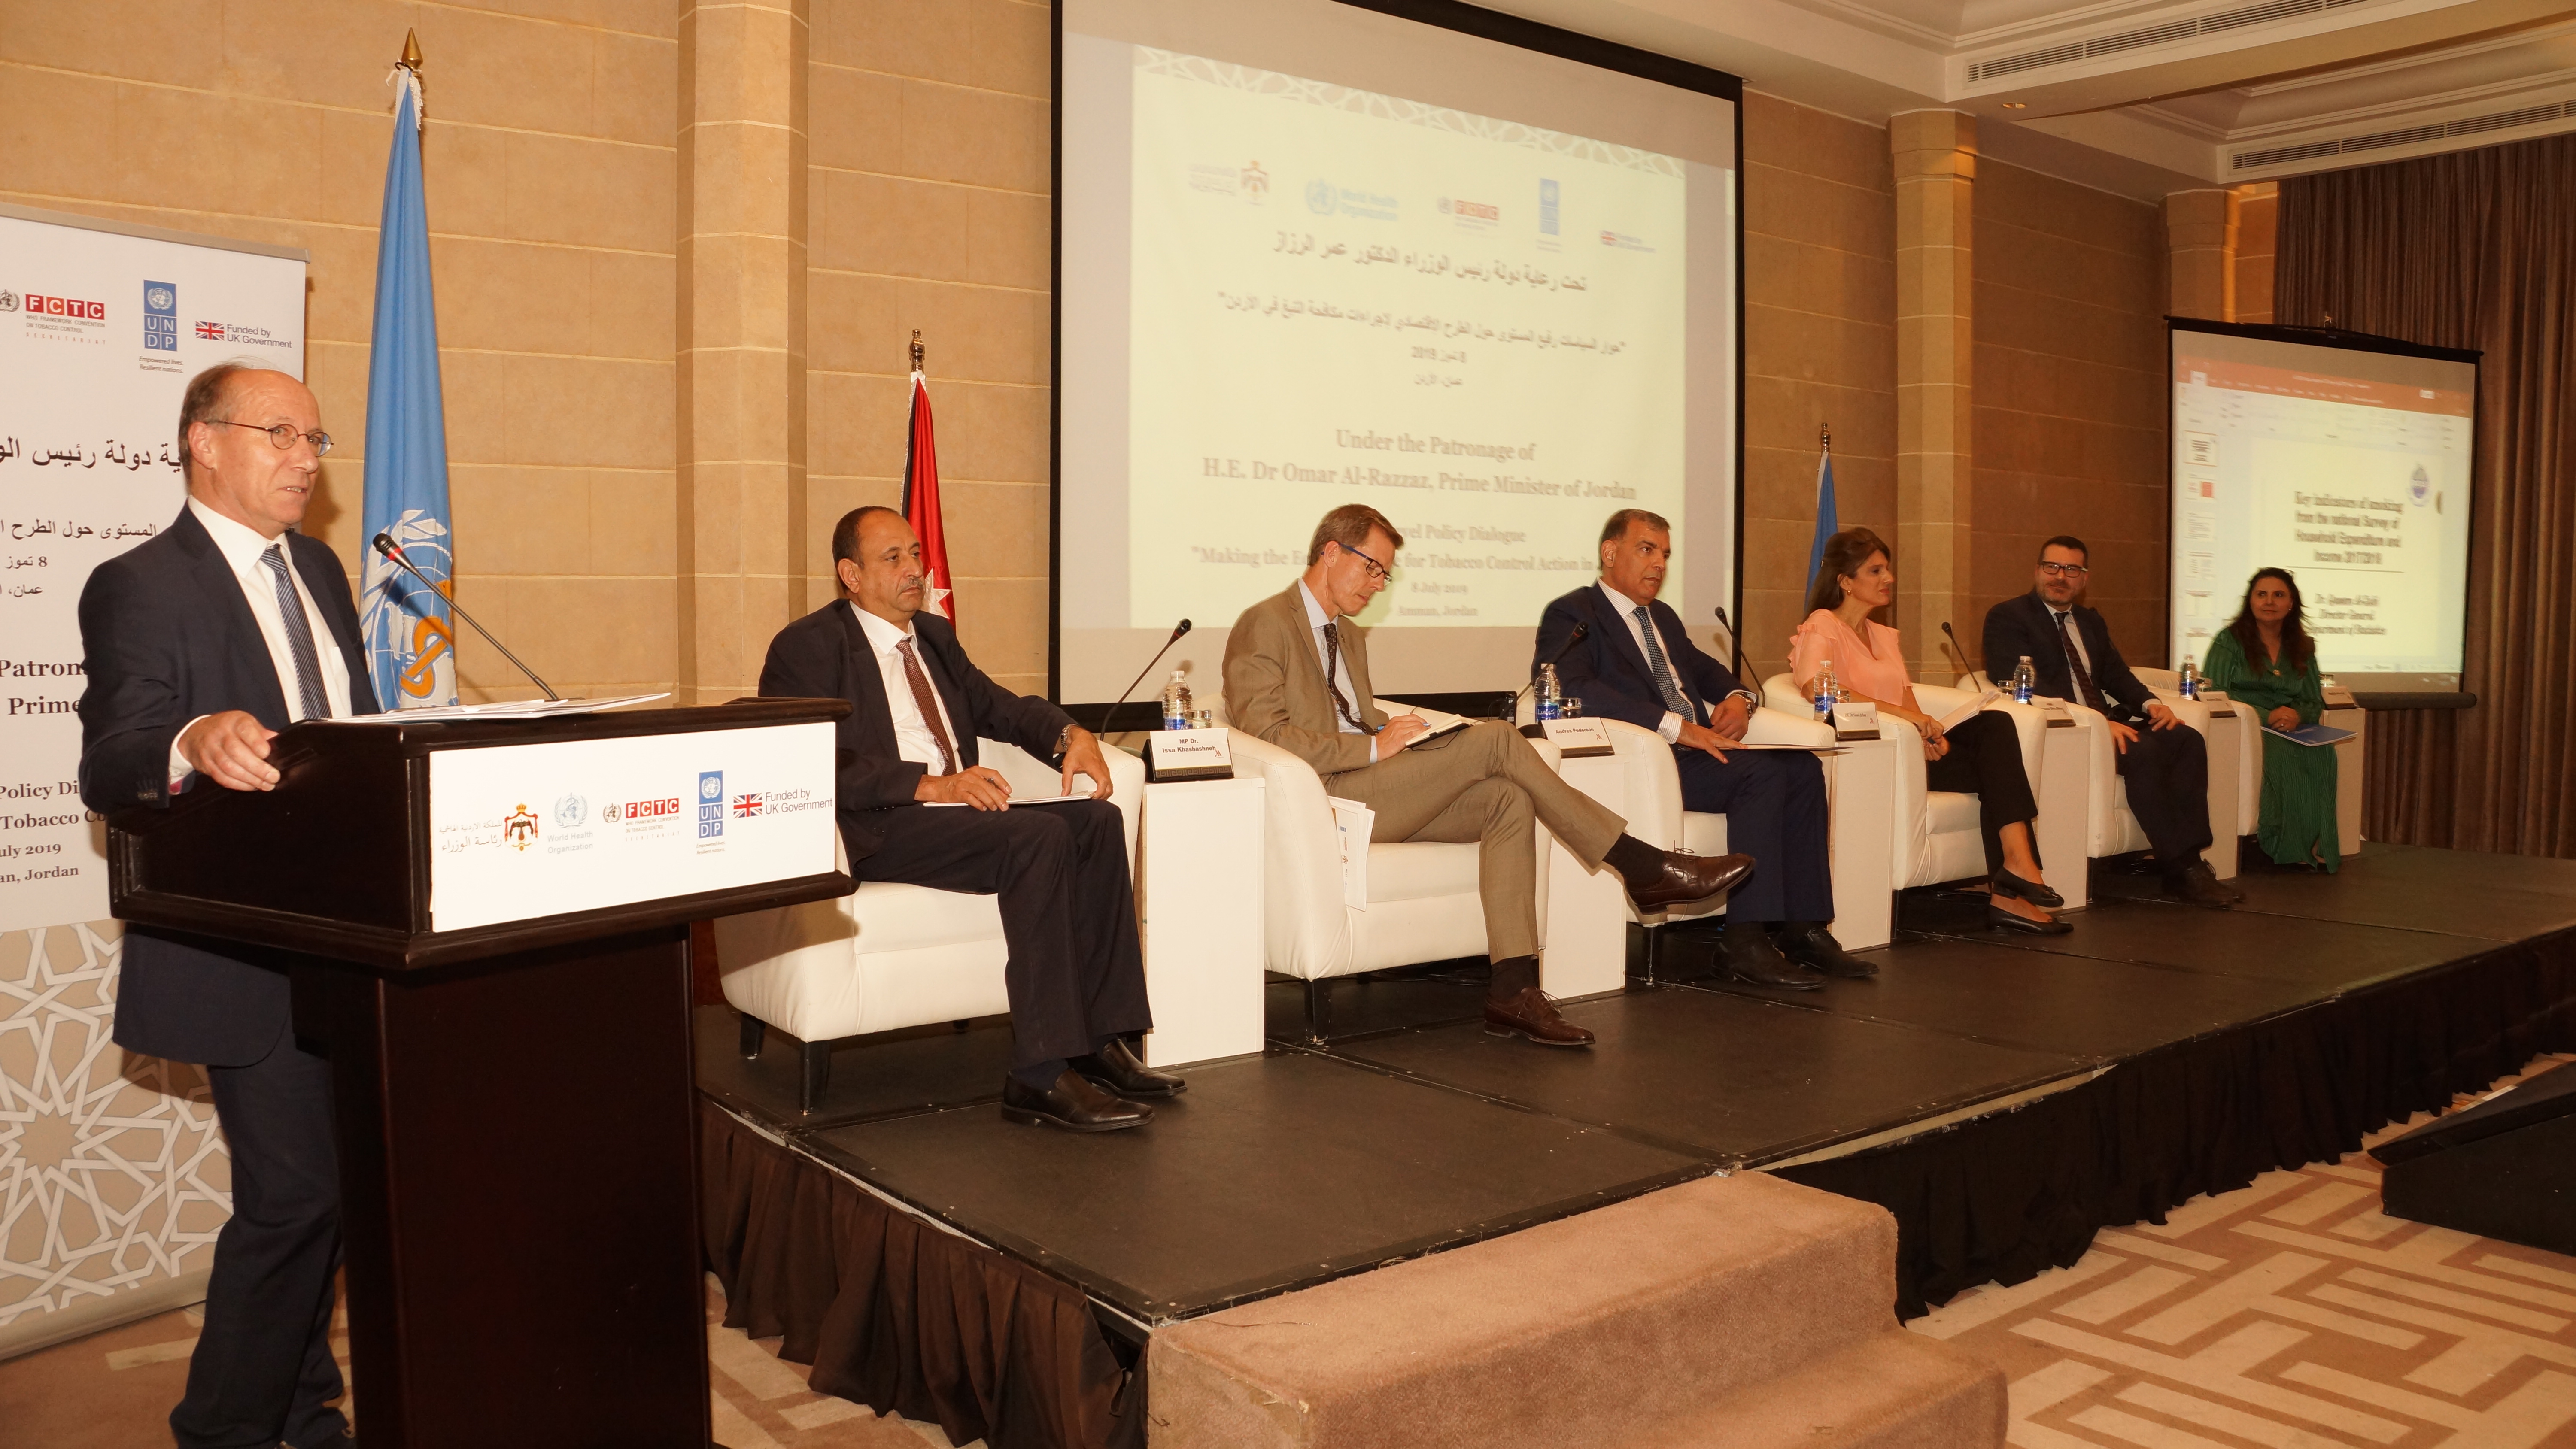 High_Level_Panel_Discussion_with_HRH_Princess_Dina_Mired_H.E_Minidter_o_